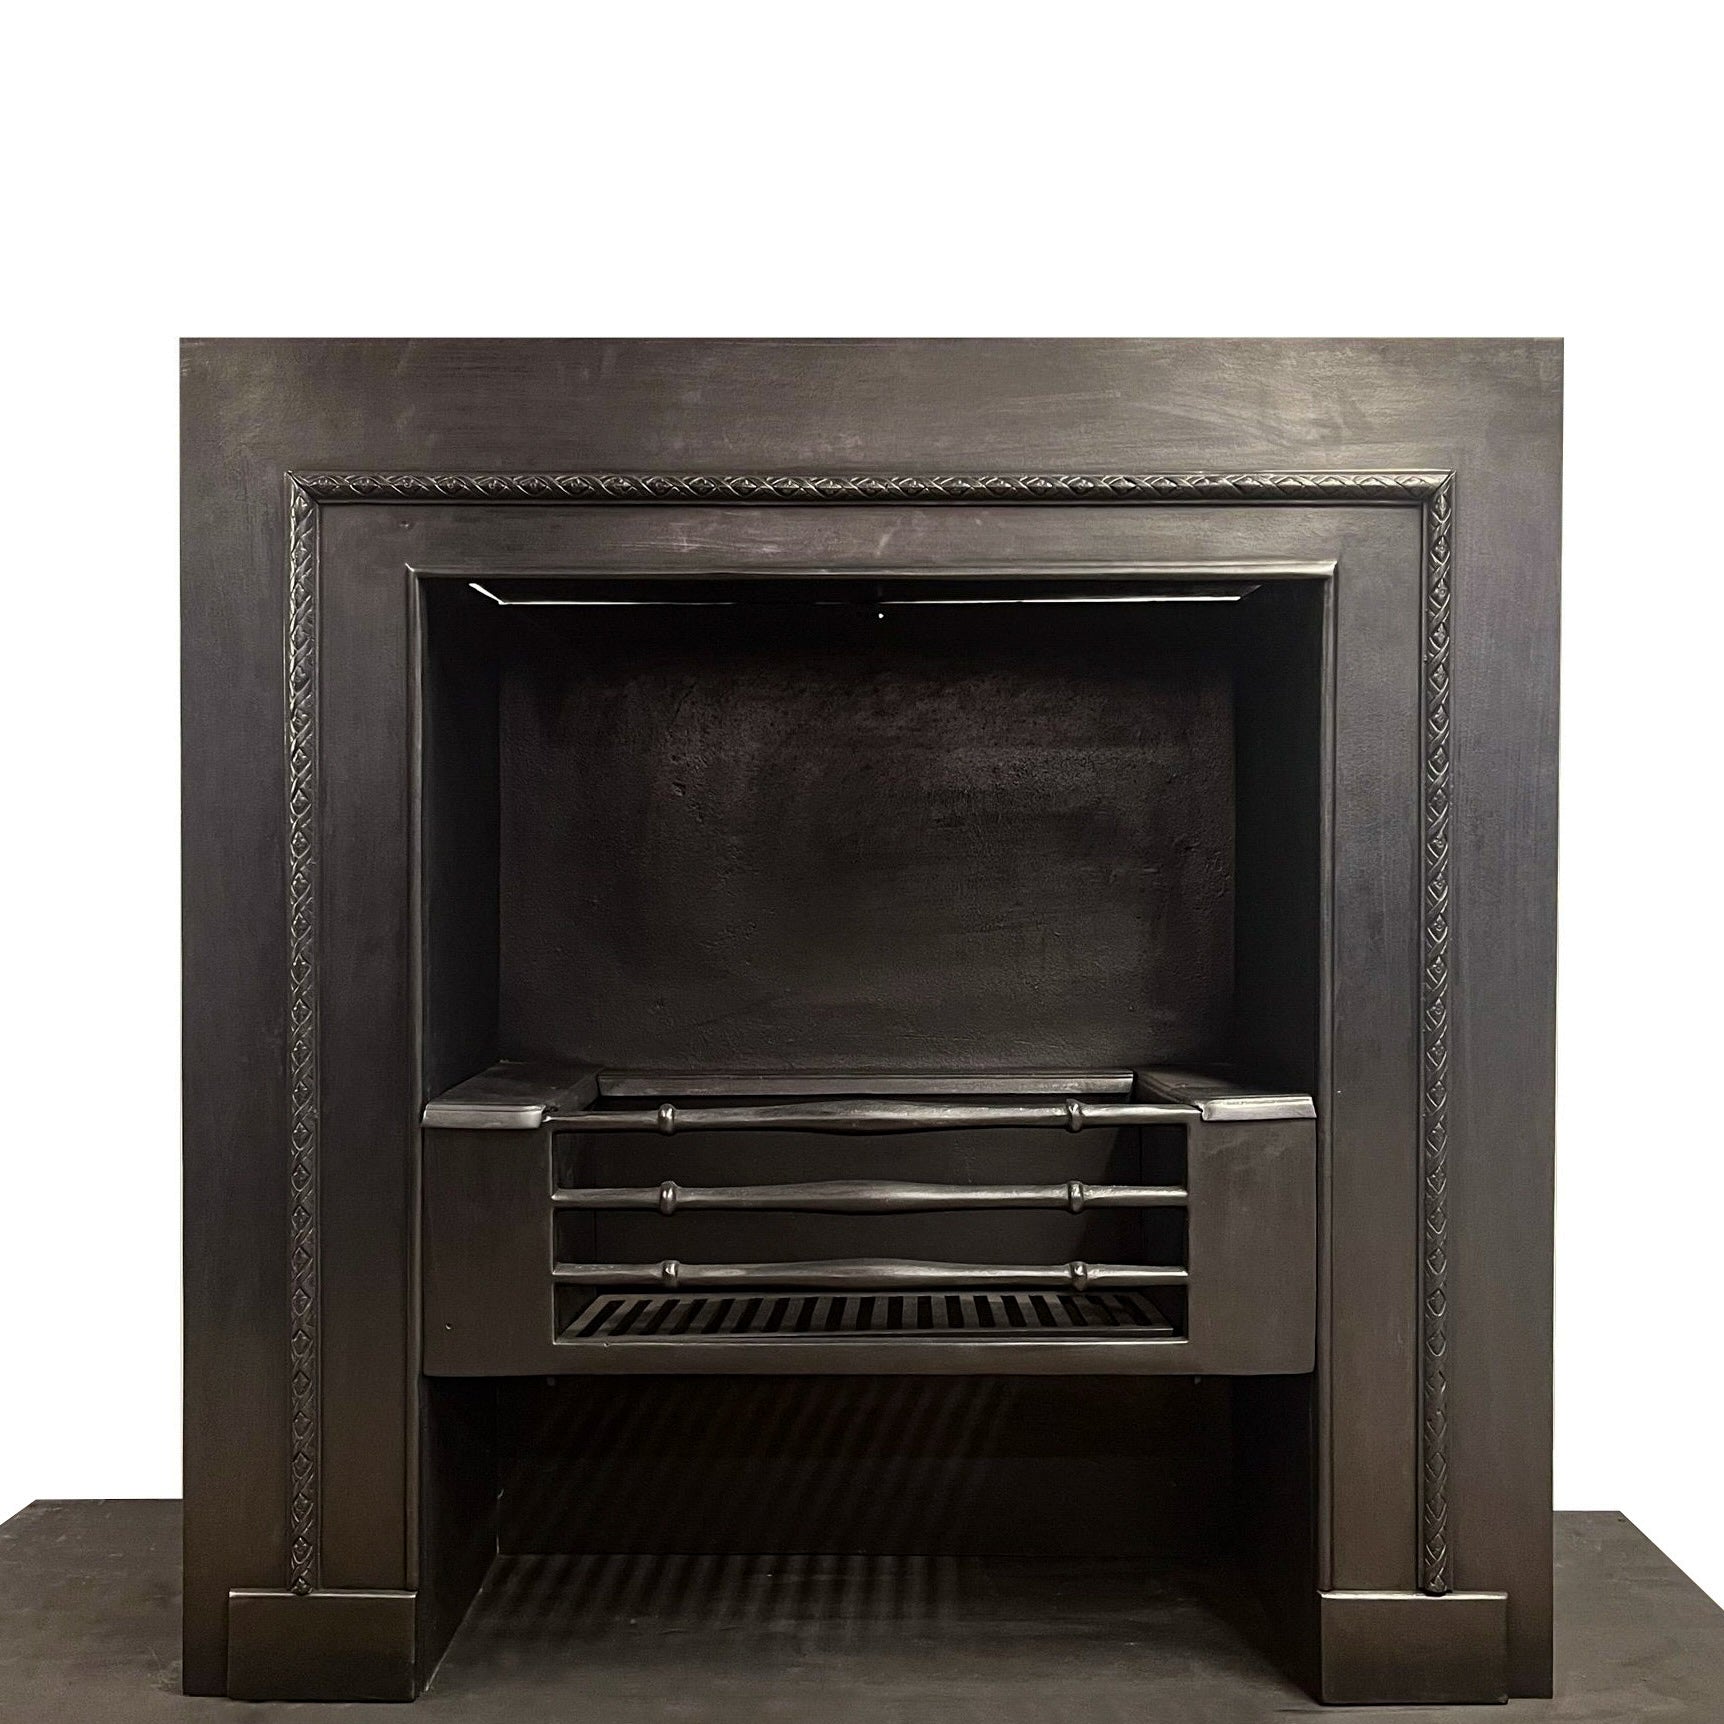 Reclaimed Regency Style Fireplace Insert | The Architectural Forum